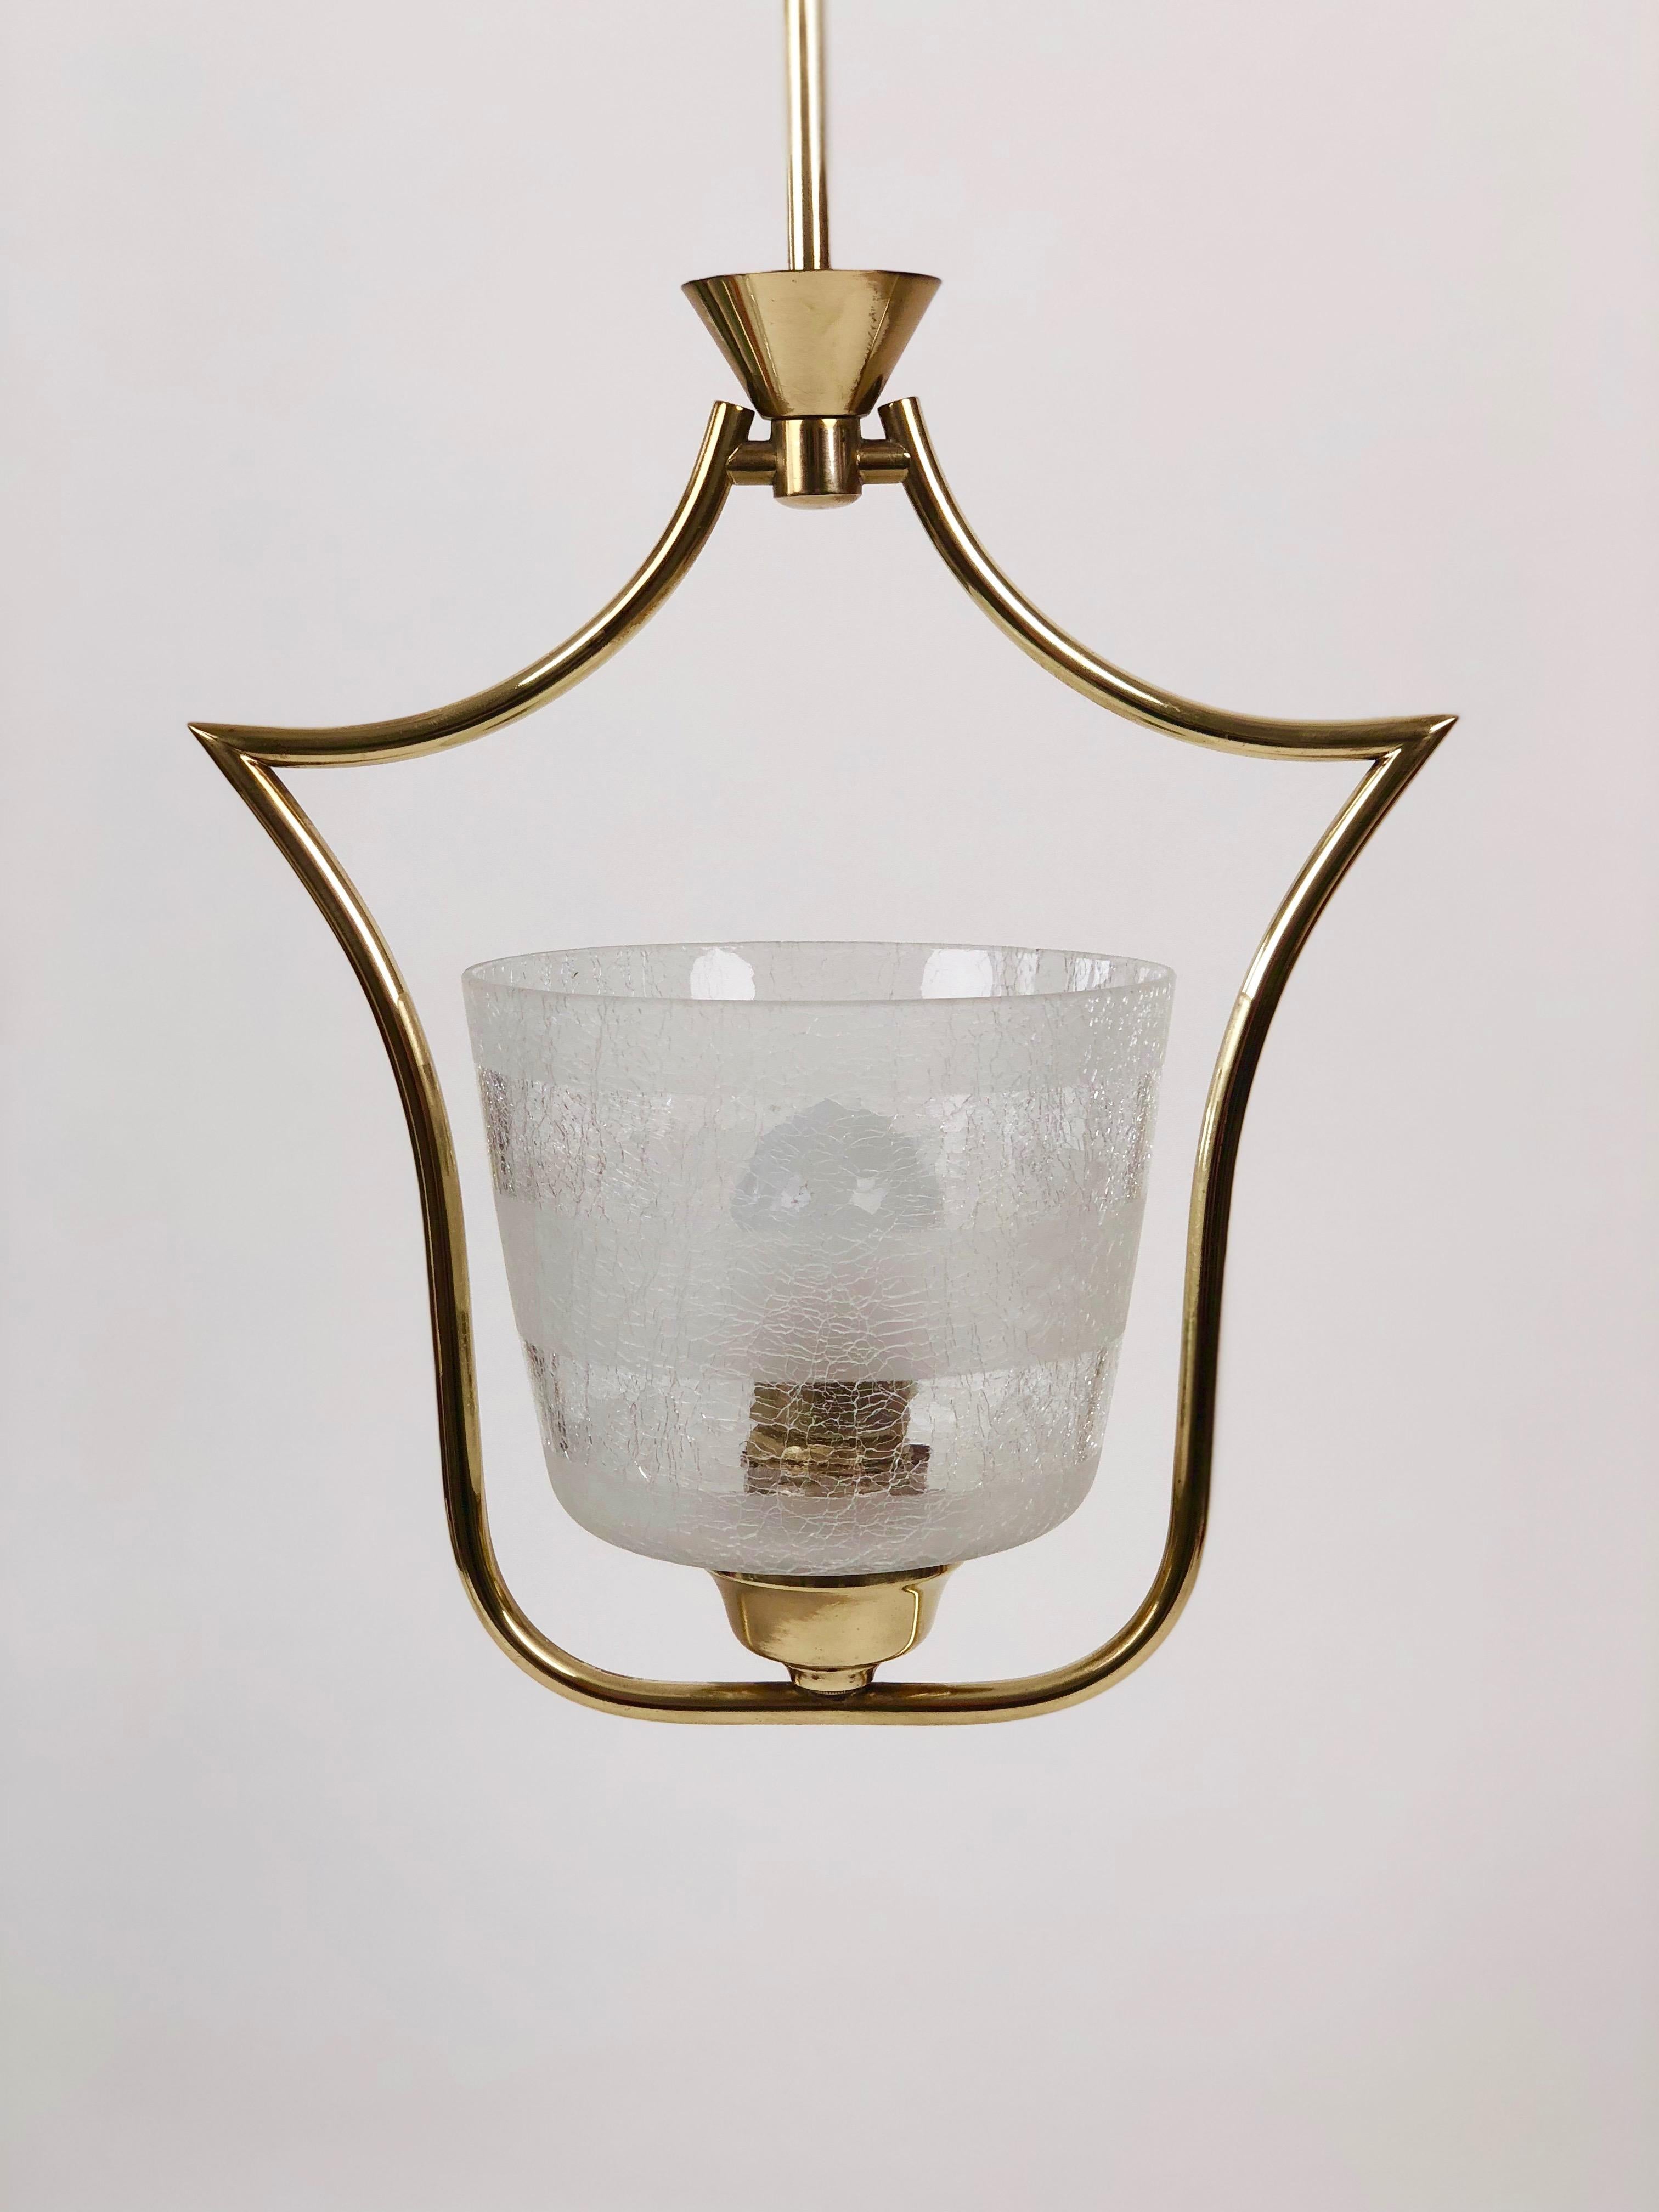 Hollywood Regency Styled Pendant Lamp in Brass and Glass, from Austria, 1950s For Sale 1